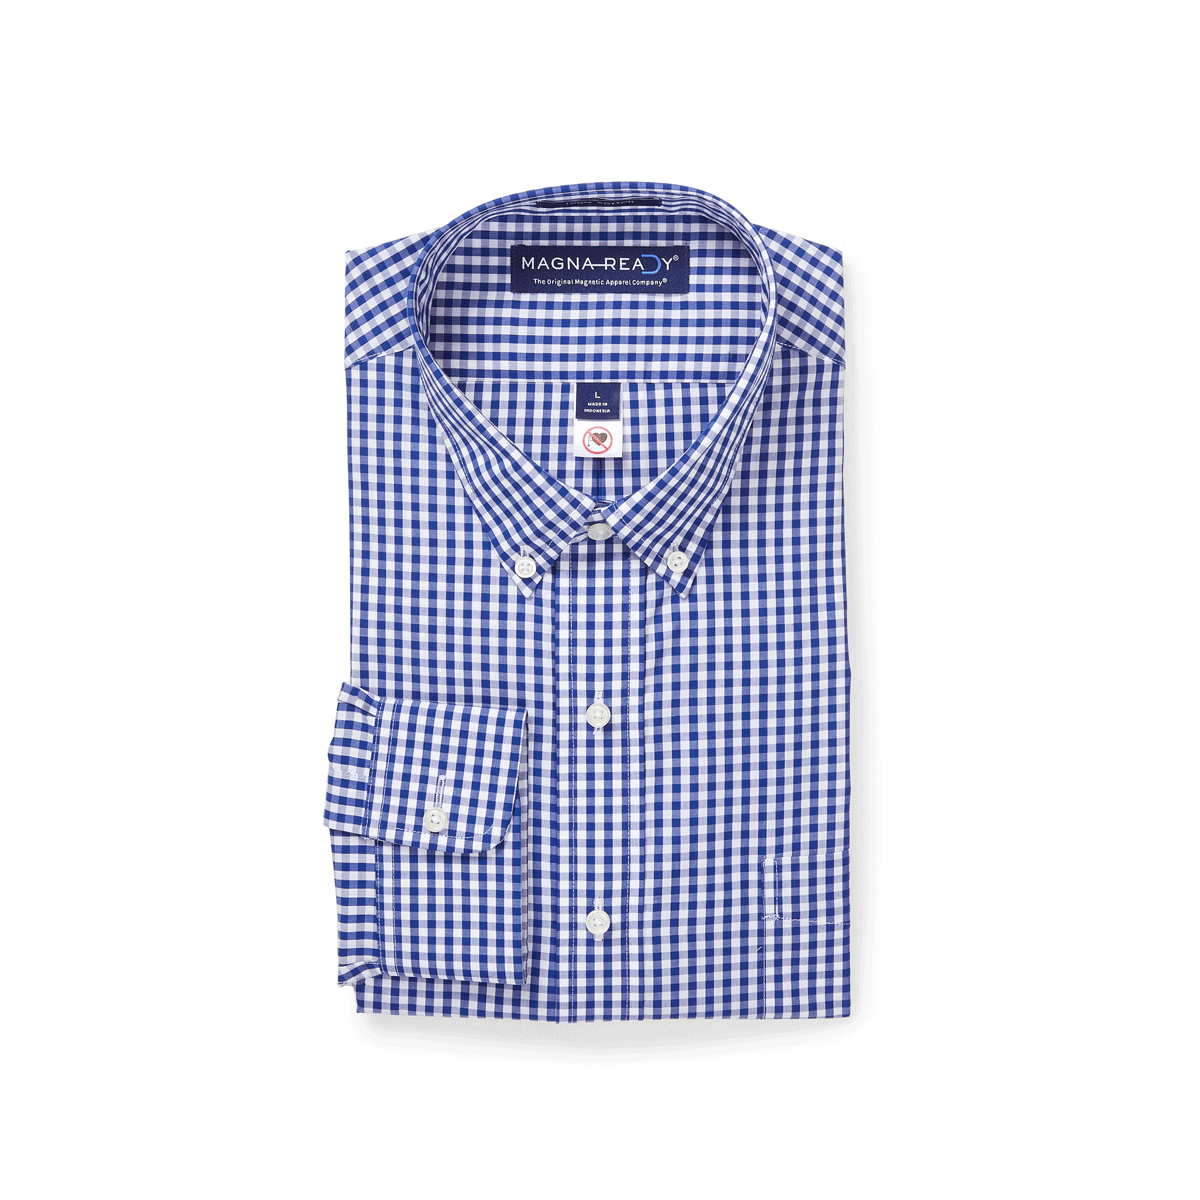 Silverts SV40000 Magnetic Buttons Dress Shirt For Men-Arthritis-Multi Blue  Check-Extra Large